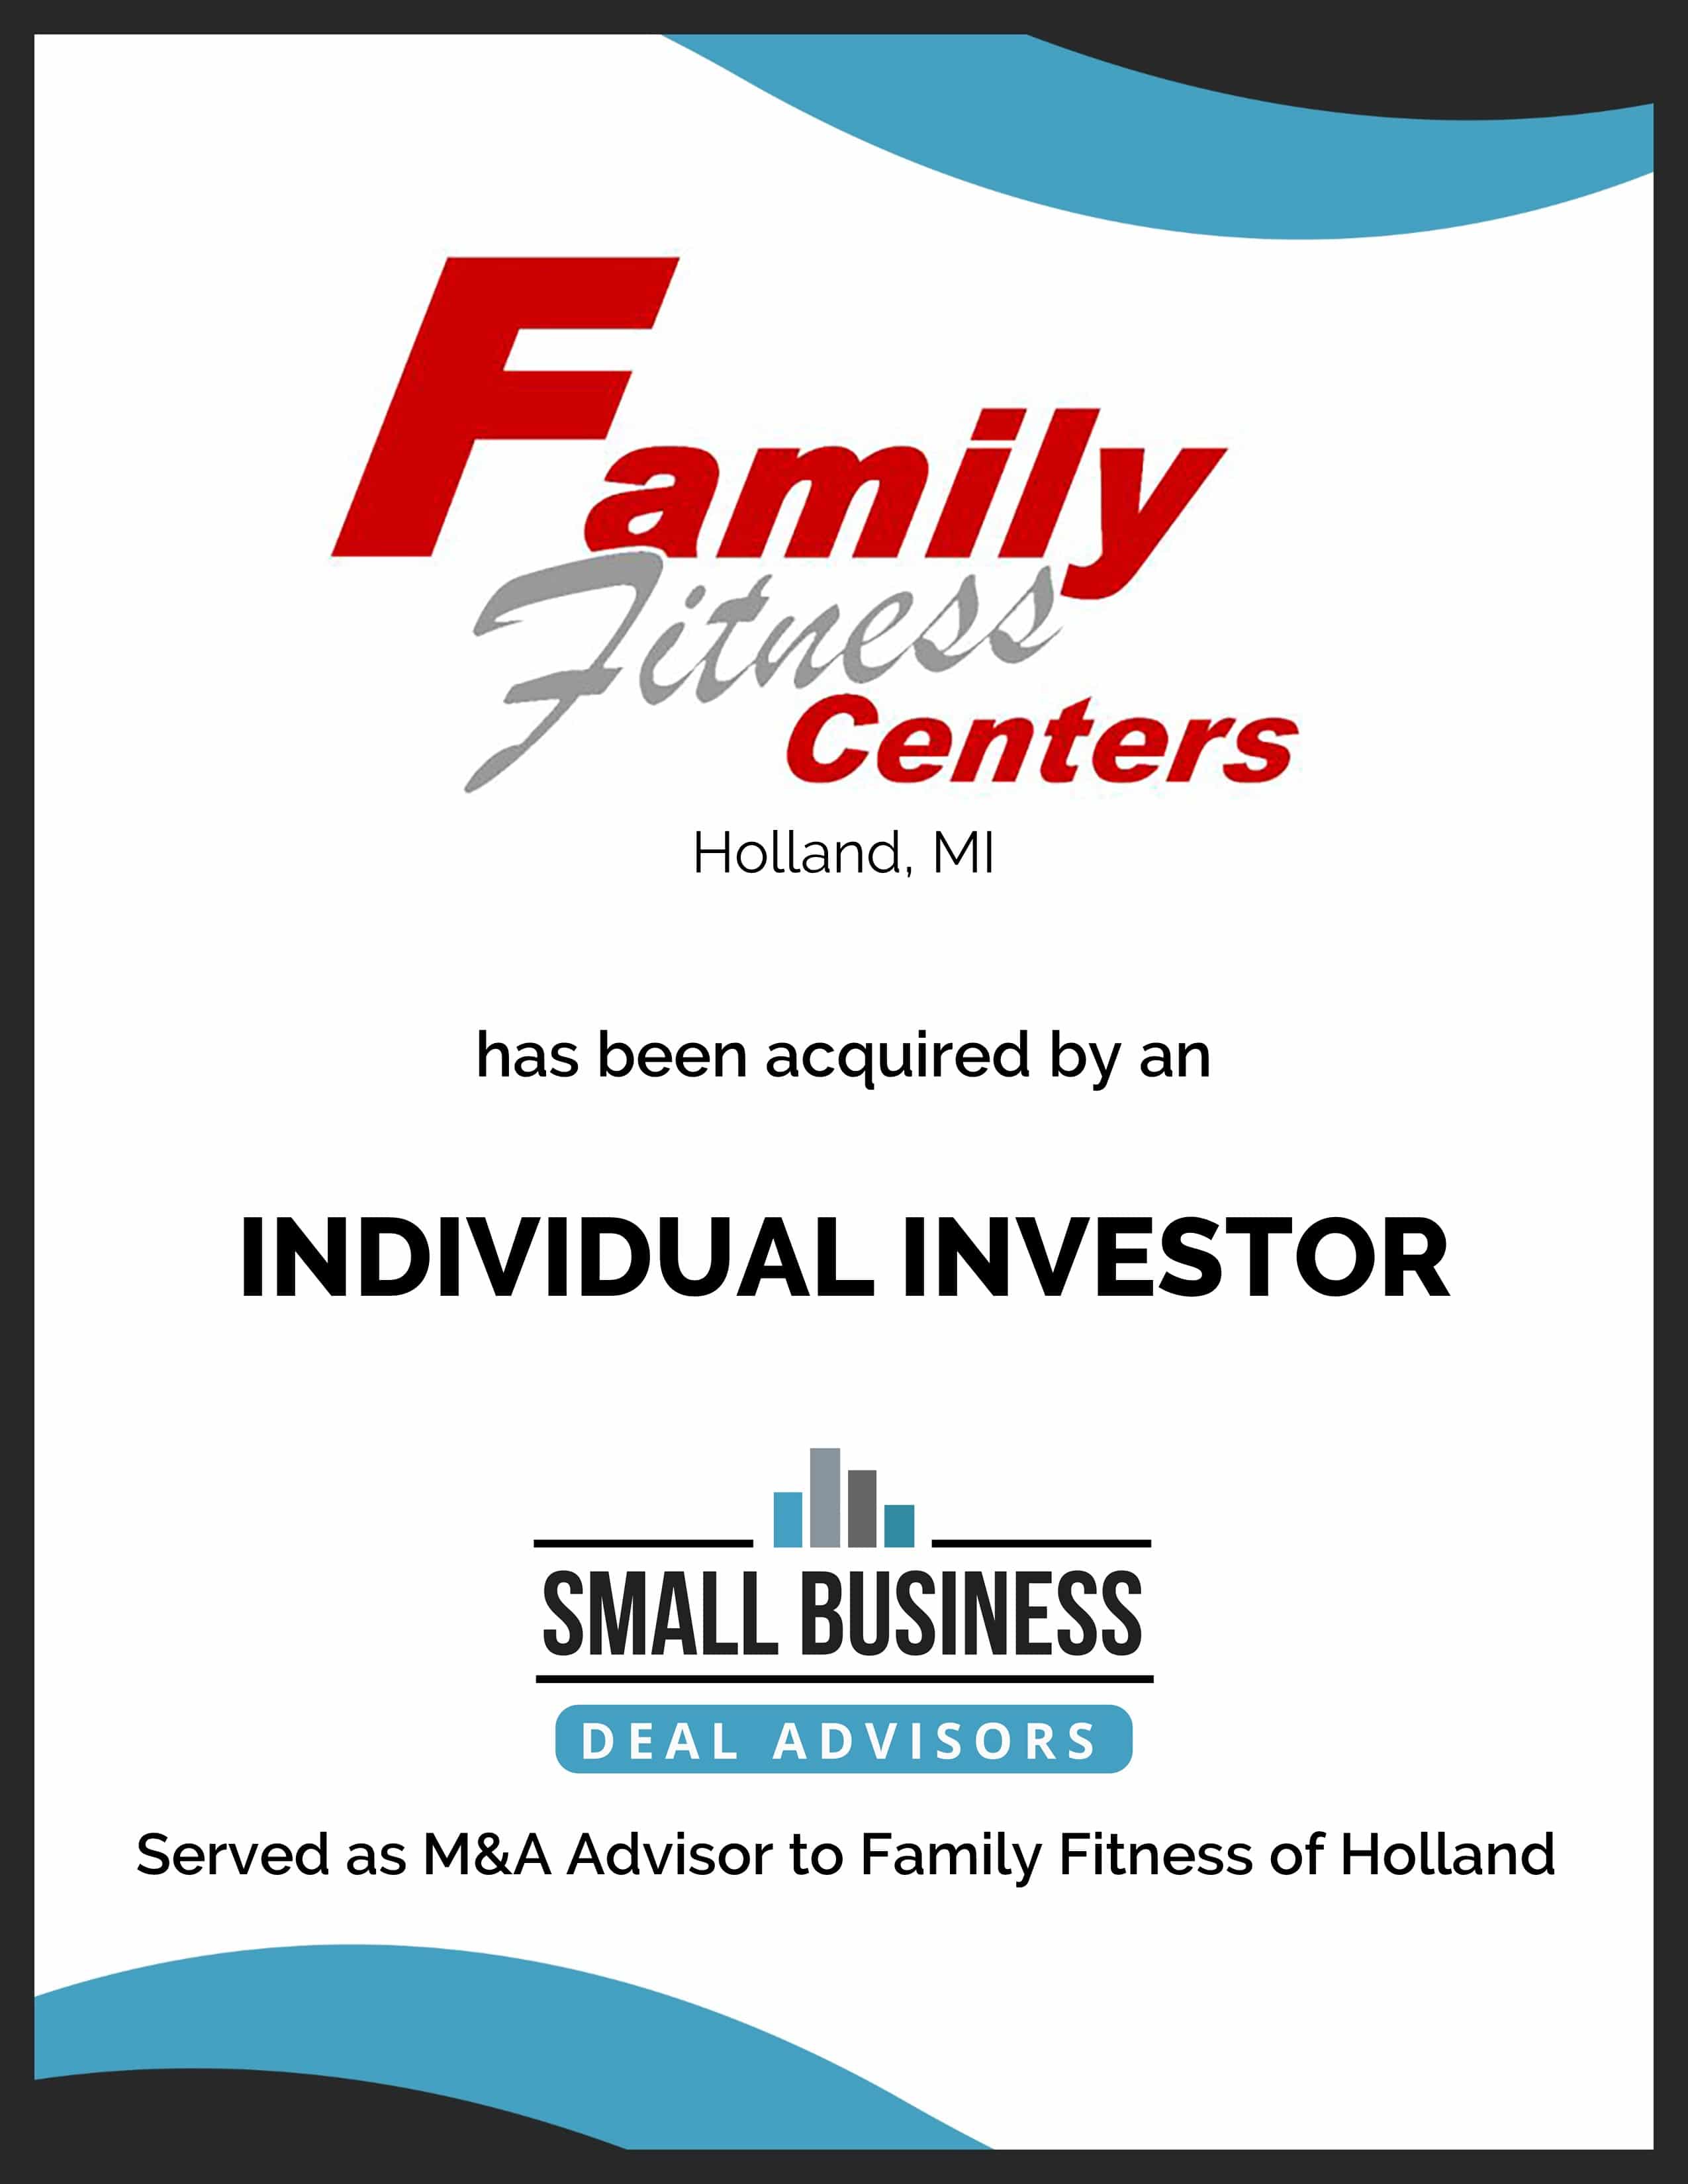 Family Fitness of Holland Sold to an Individual Investor